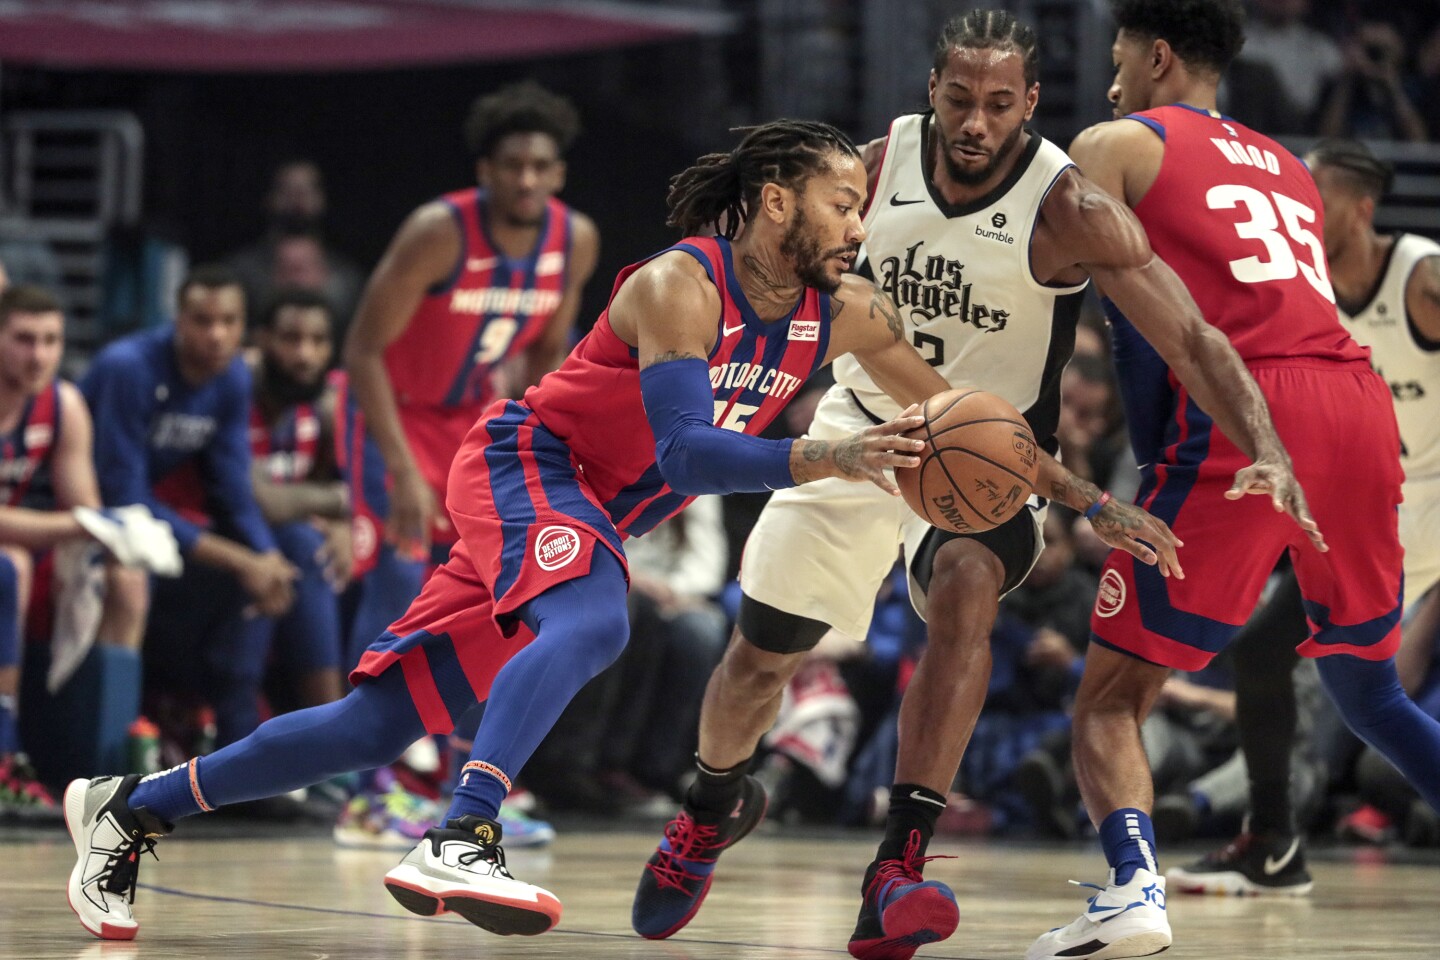 LOS ANGELES, CA, THURSDAY, JANUARY 2, 2020 -LA Clippers forward Kawhi Leonard (2) guards Detroit Pistons guard Derrick Rose (25) during first half action at Staples Center. (Robert Gauthier/Los Angeles Times)